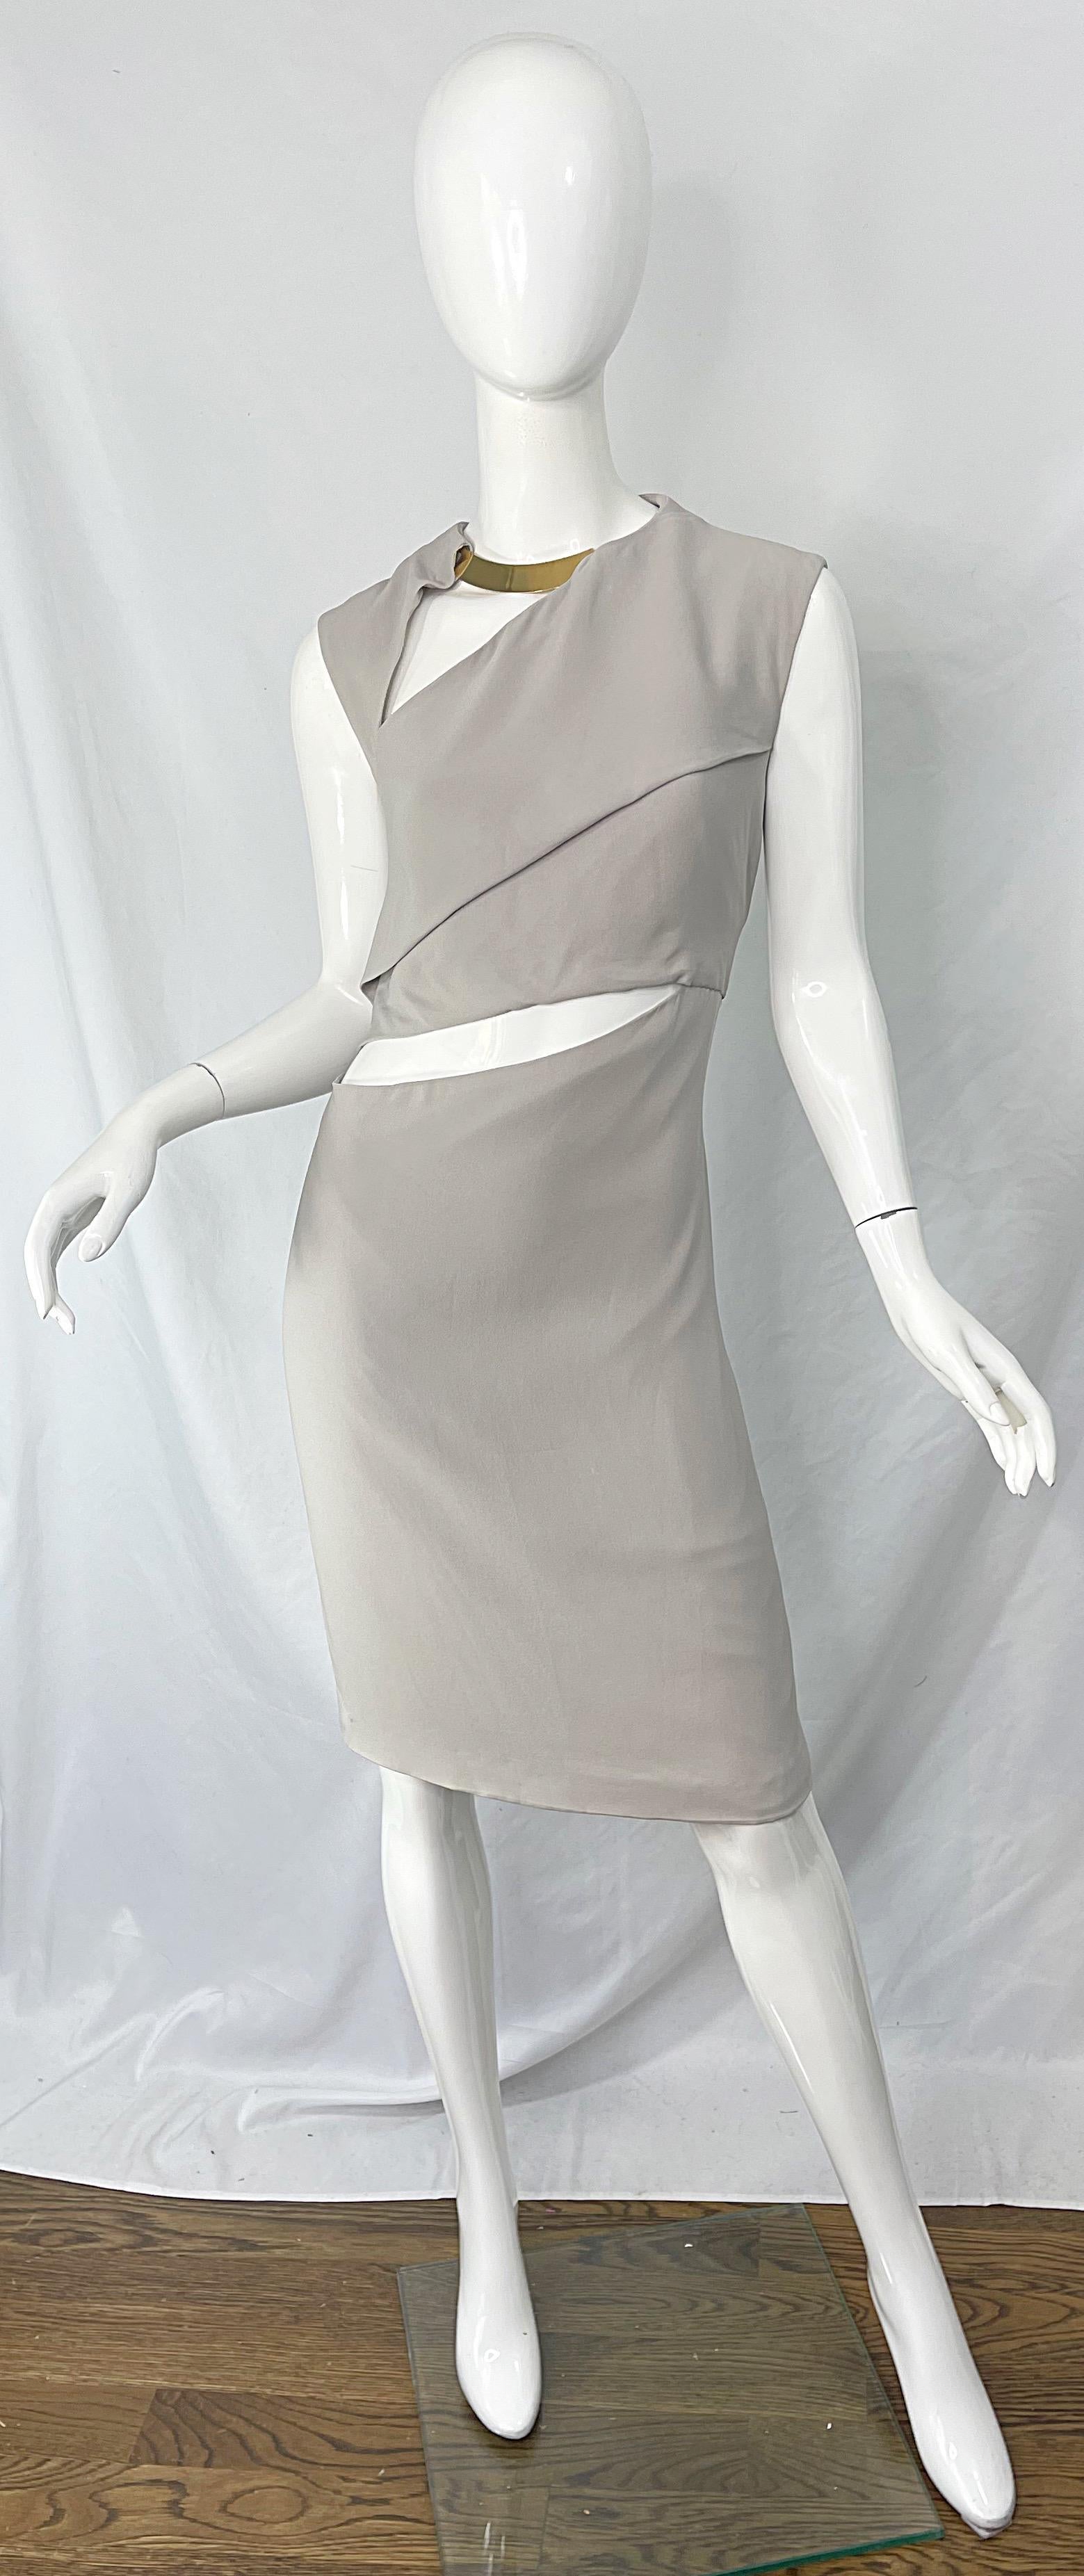 Gucci Fall 2010 Runway Size 48 / US 12 Khaki Nude Tan Gold Cut Out Silk Dress  For Sale 7